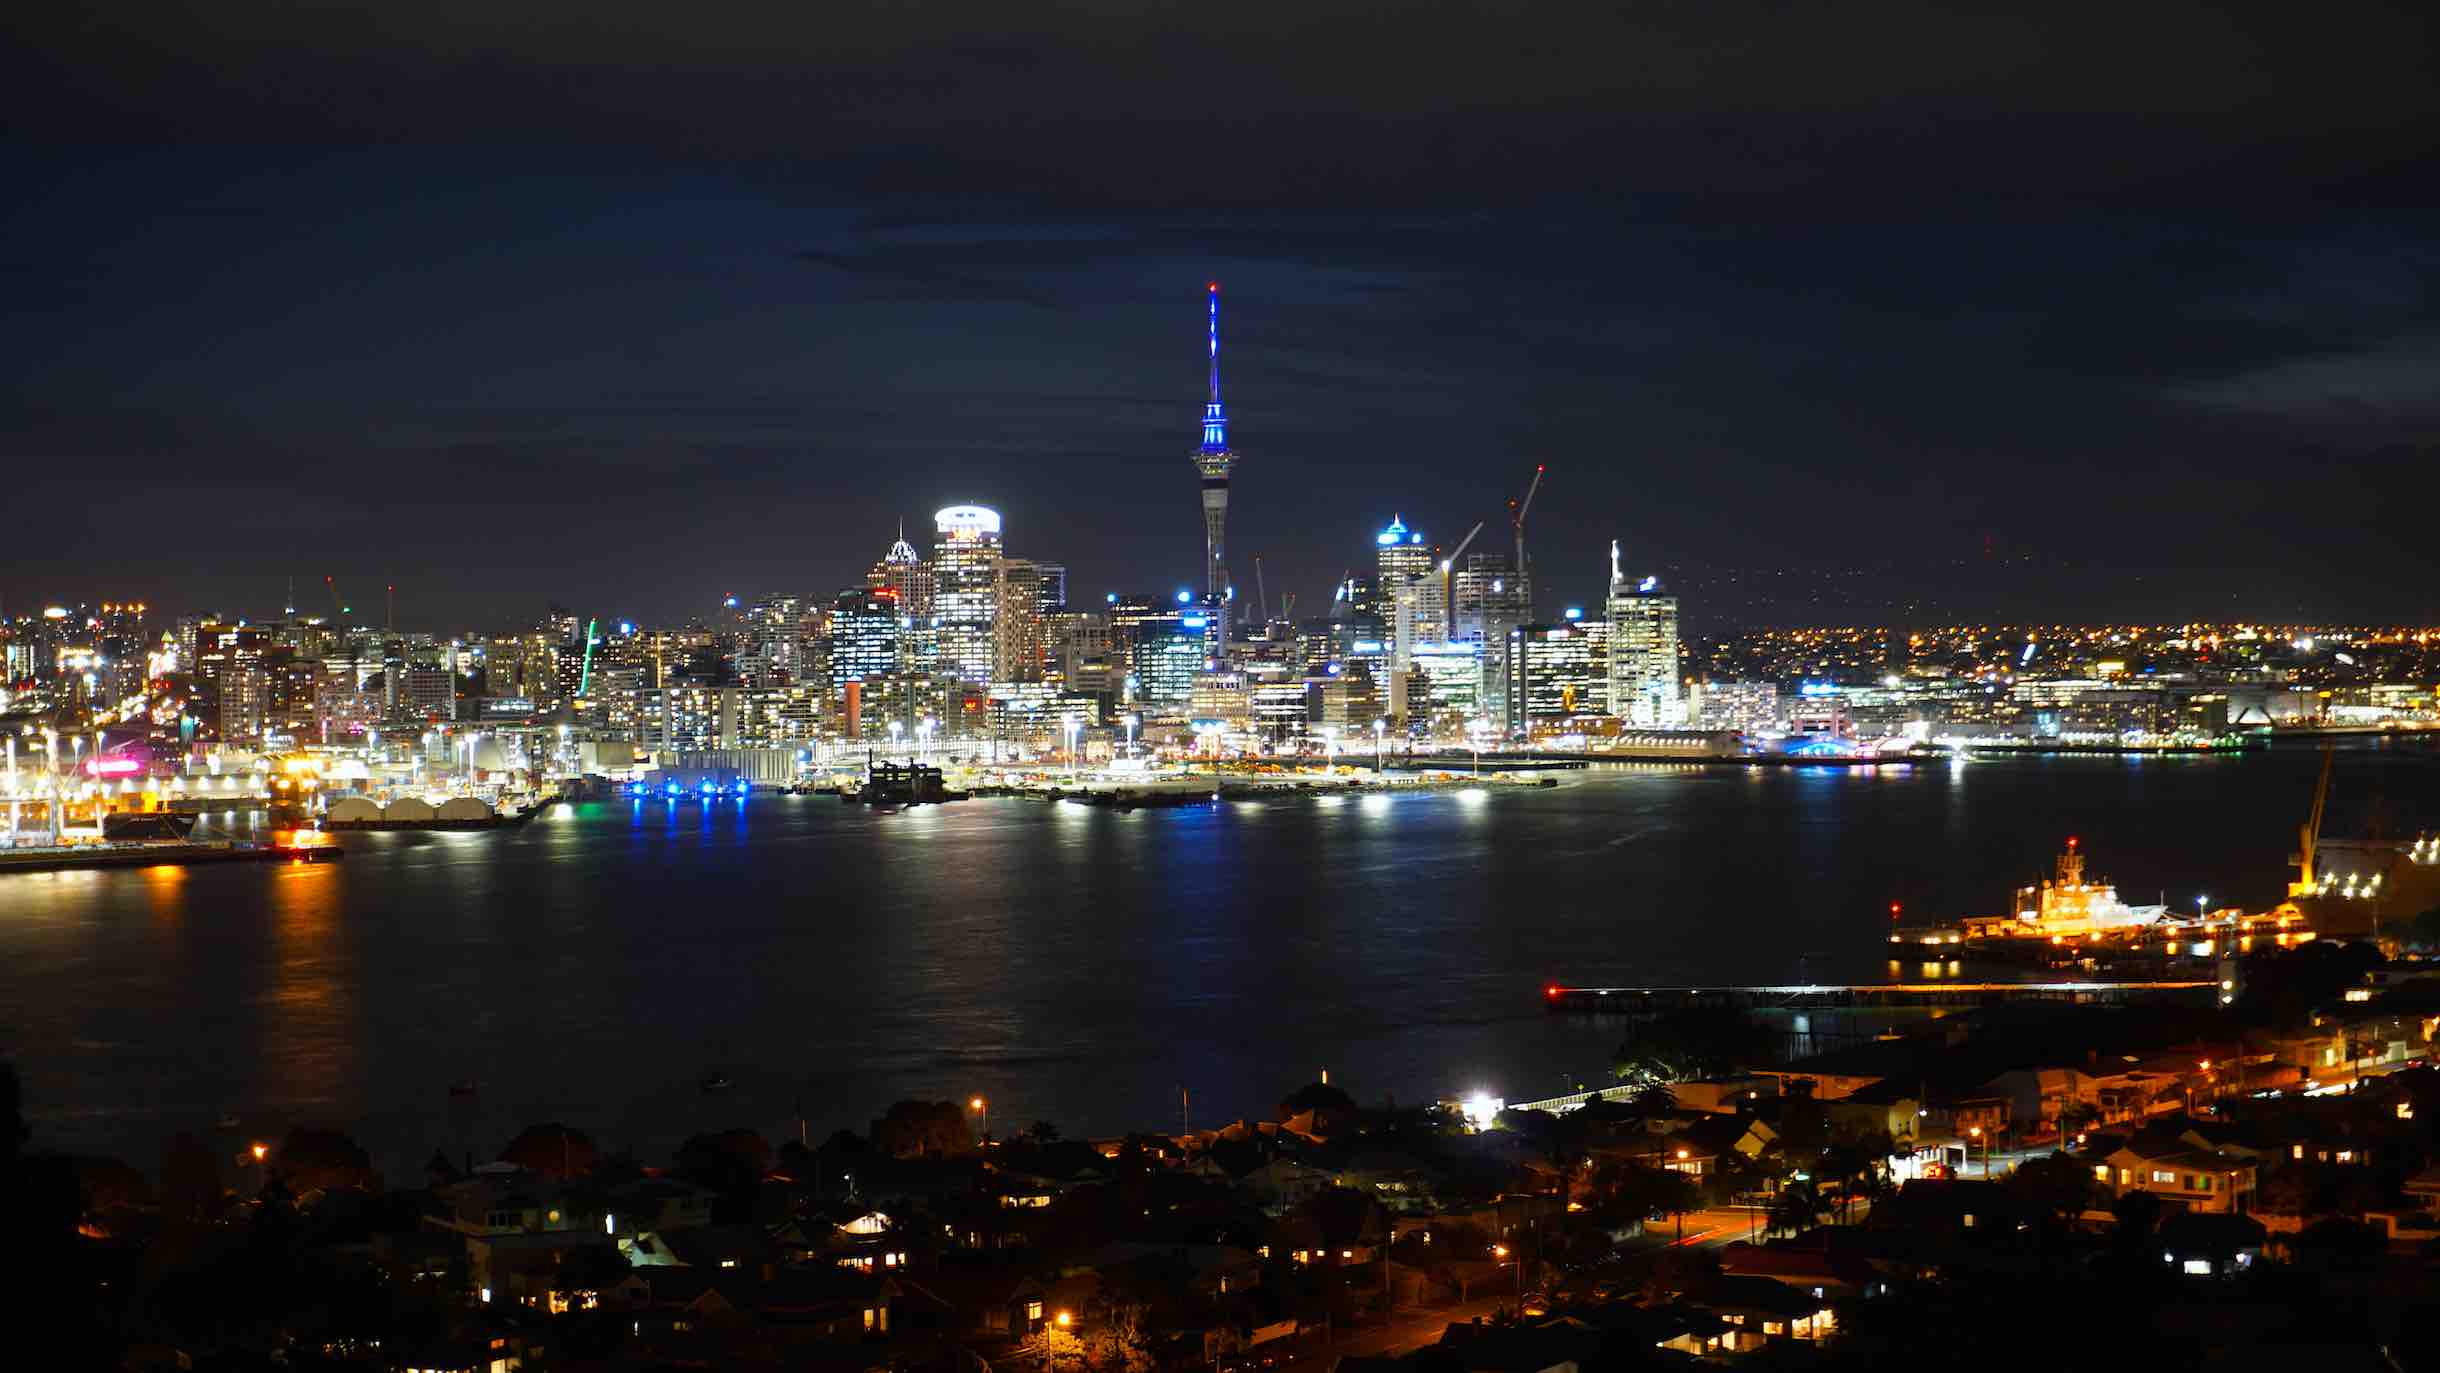 Auckland's skyline from Mount Victoria across the harbor